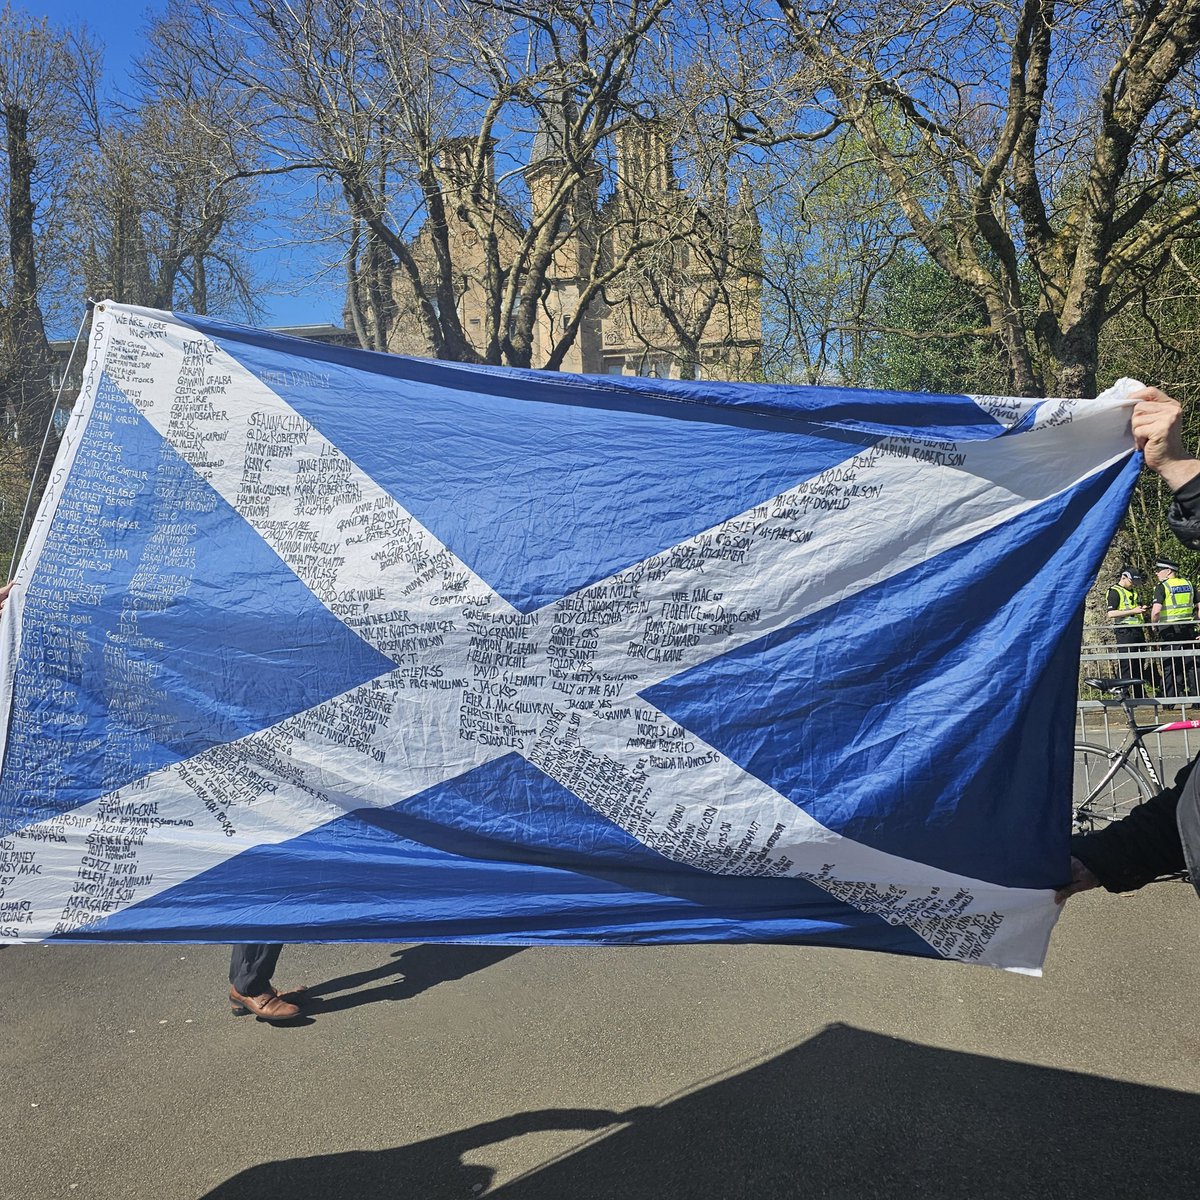 Saturday in Glasgow is our @AUOBNOW organised #IndyMarch. Not all of us can be there in body, but I have a be-there-in-spirit option: The #SolidaritySaltire. If you would like your name added please let me know. I've loads of space and a new silver pen. I will bring you all